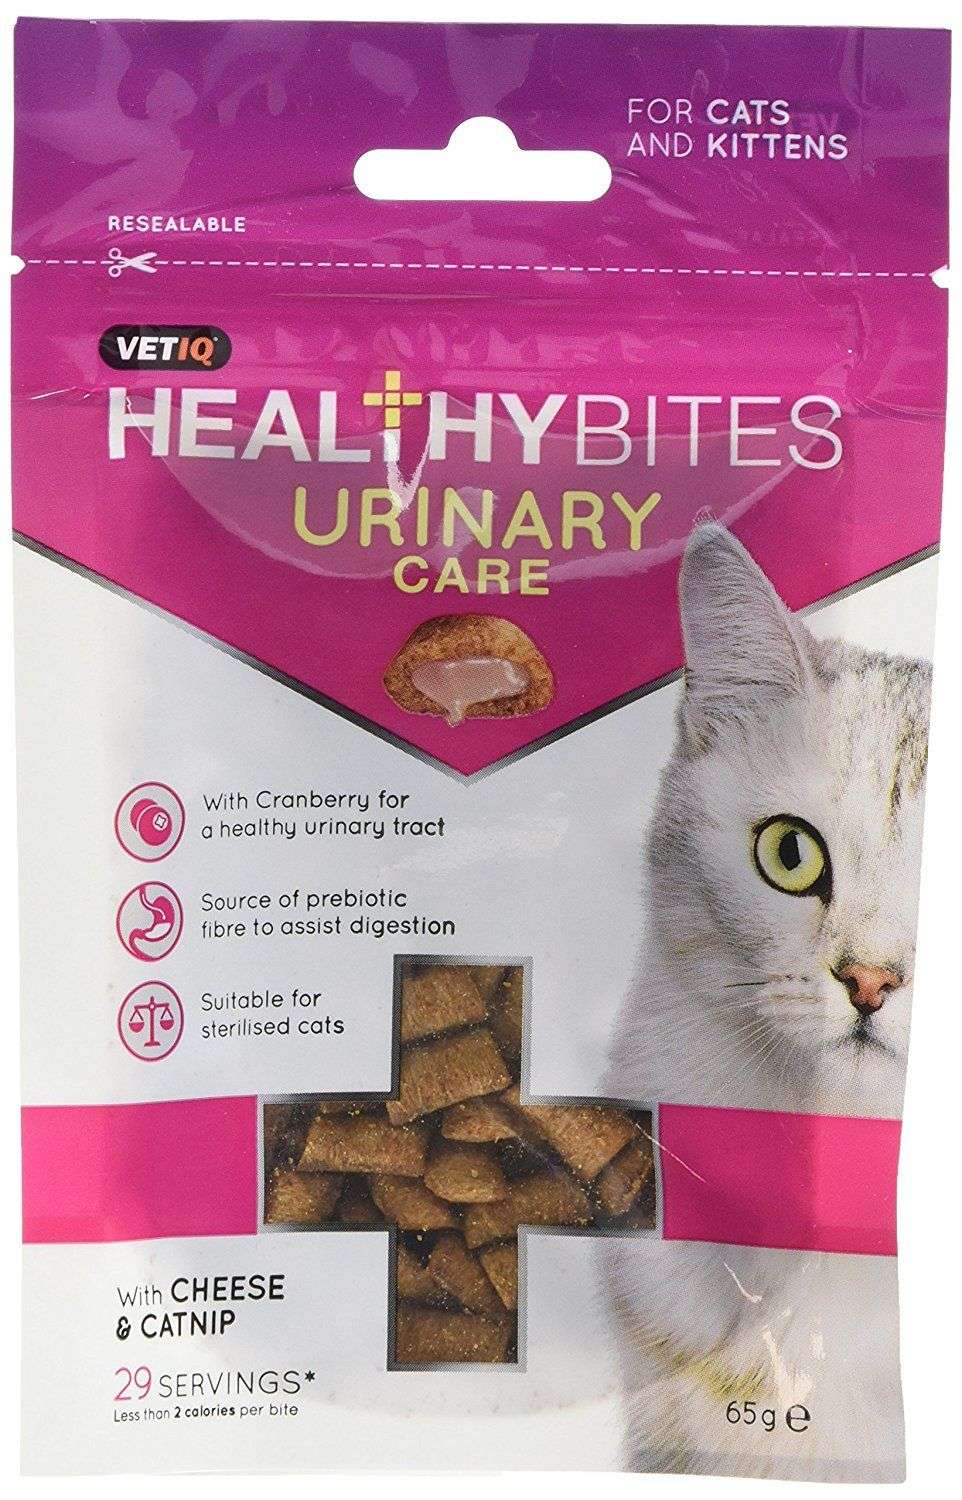 VetIQ Healthy Bites Urinary Care for cats and kittens 65g ...